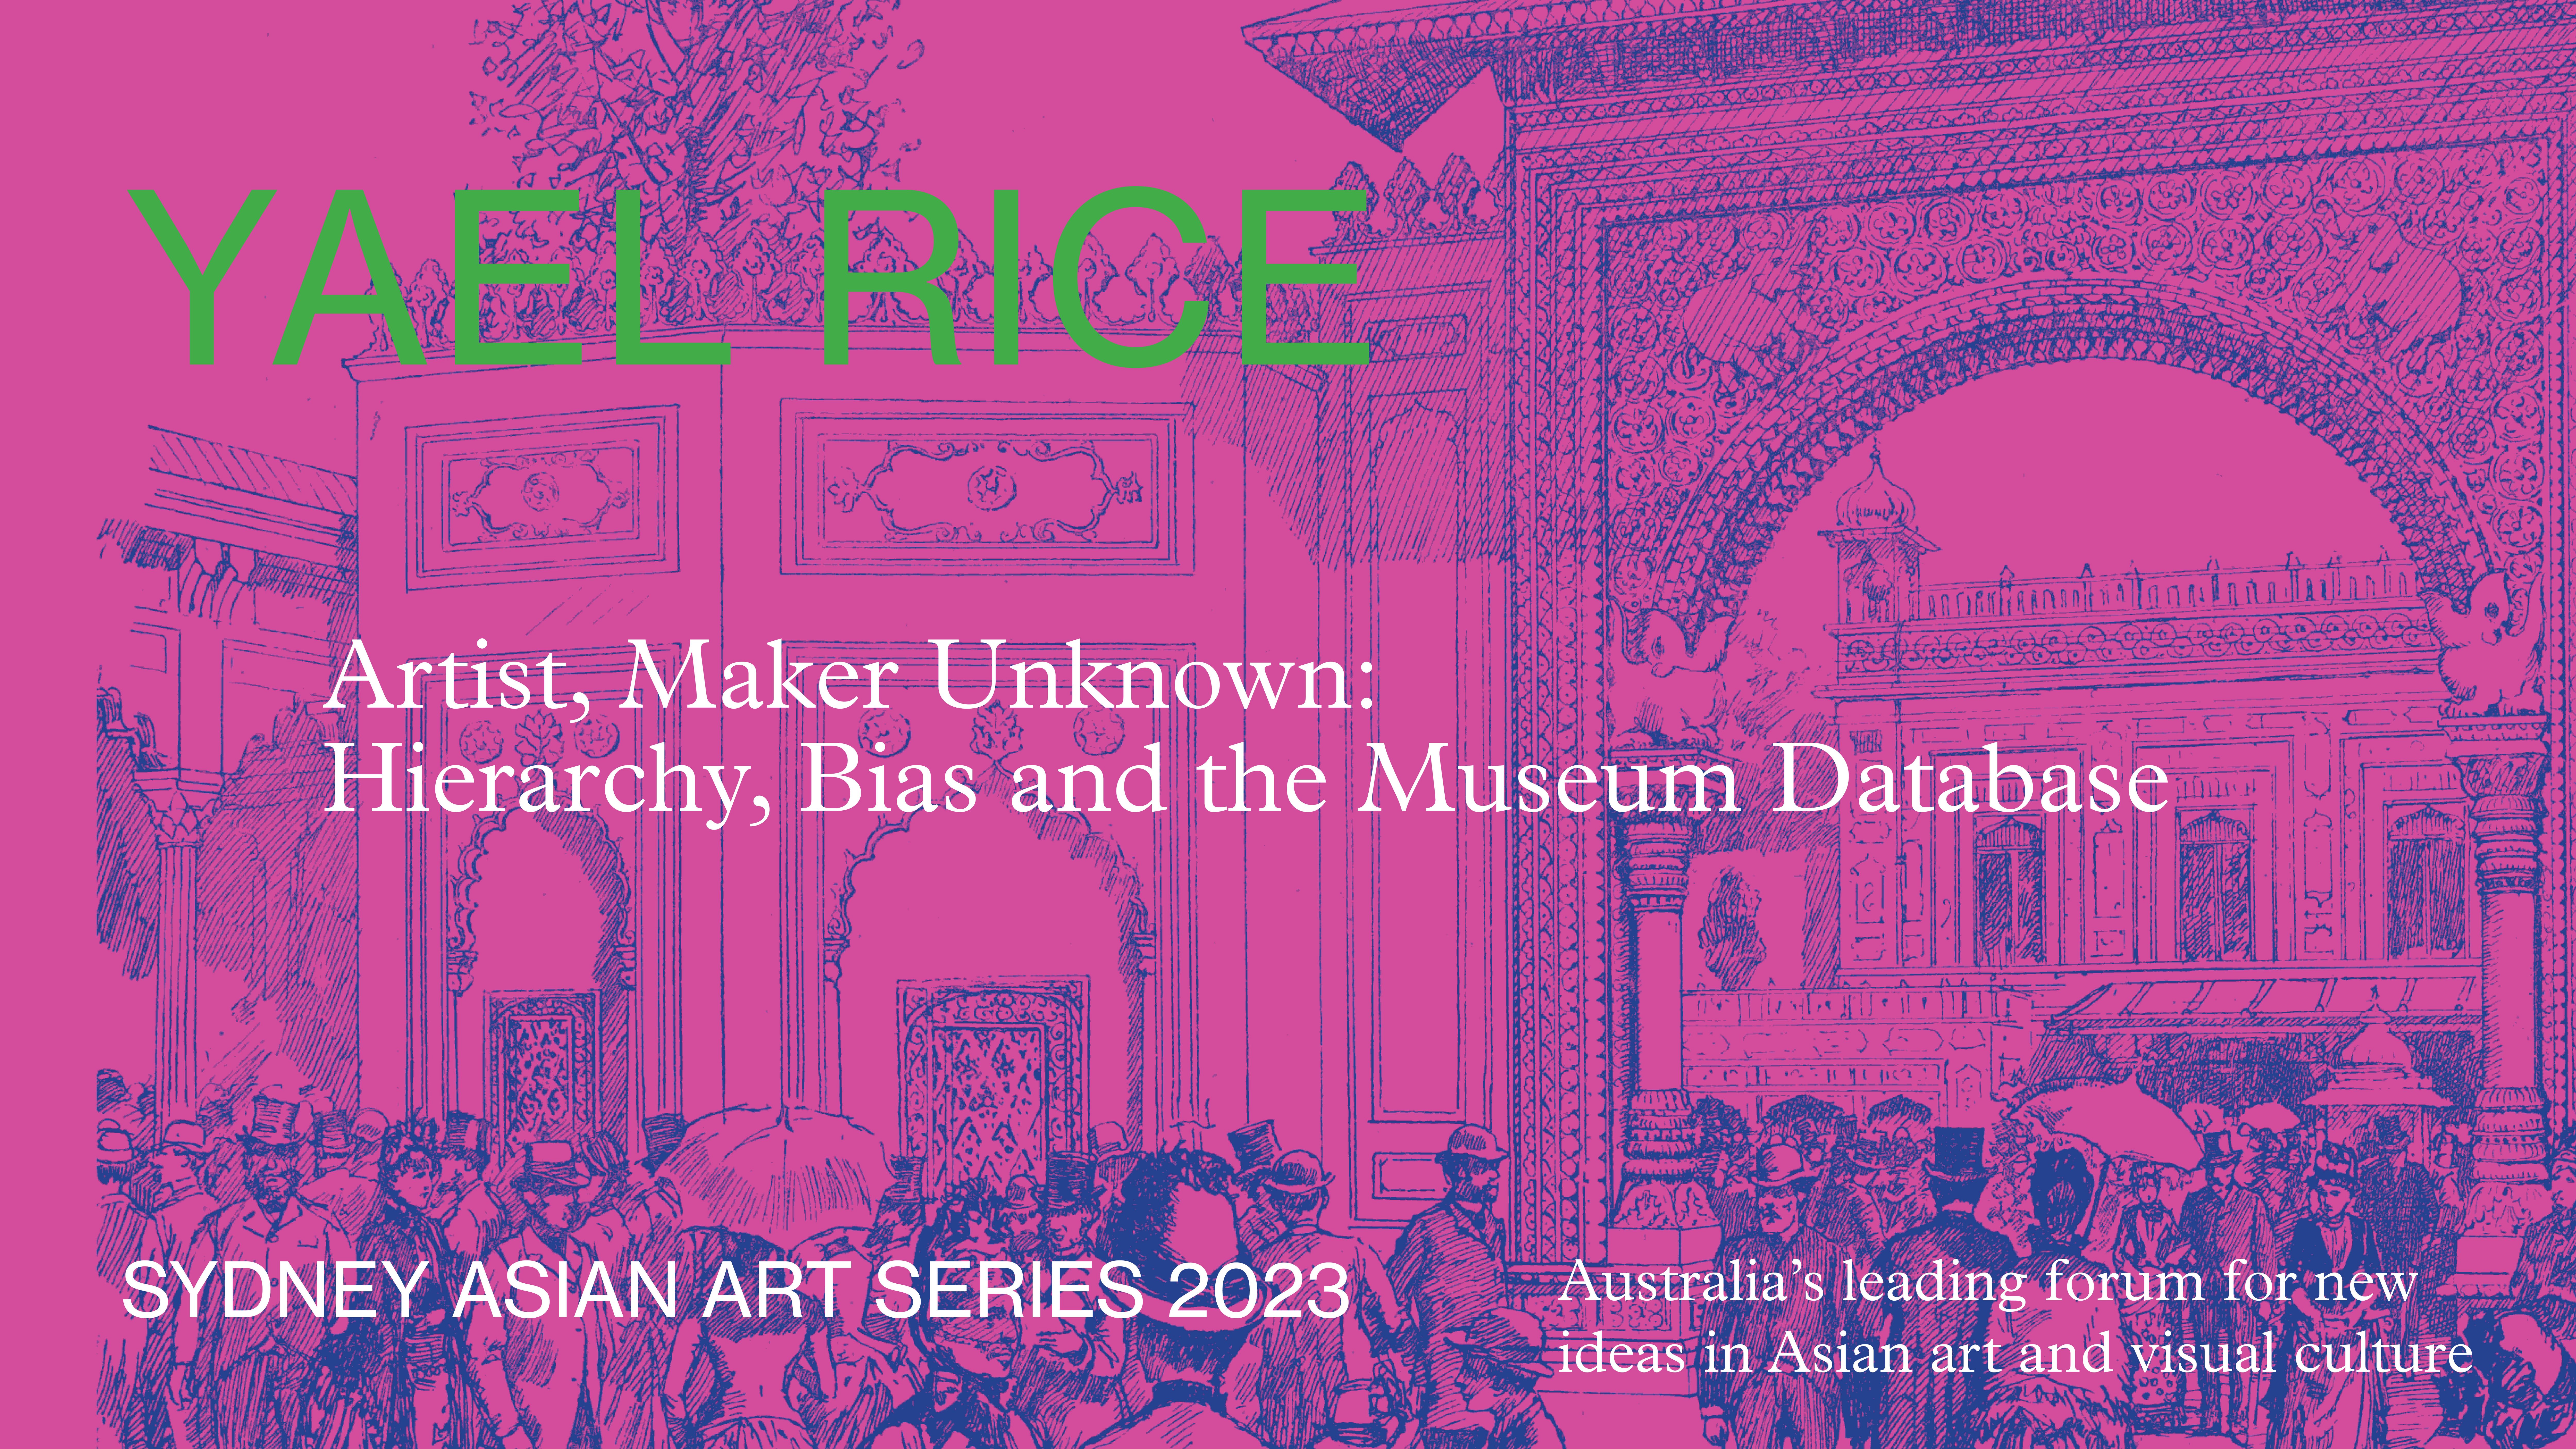 A title screen reading "Yael Rice: Artist, Maker Unknown: Hierarchy, Bias and the Museum Database"